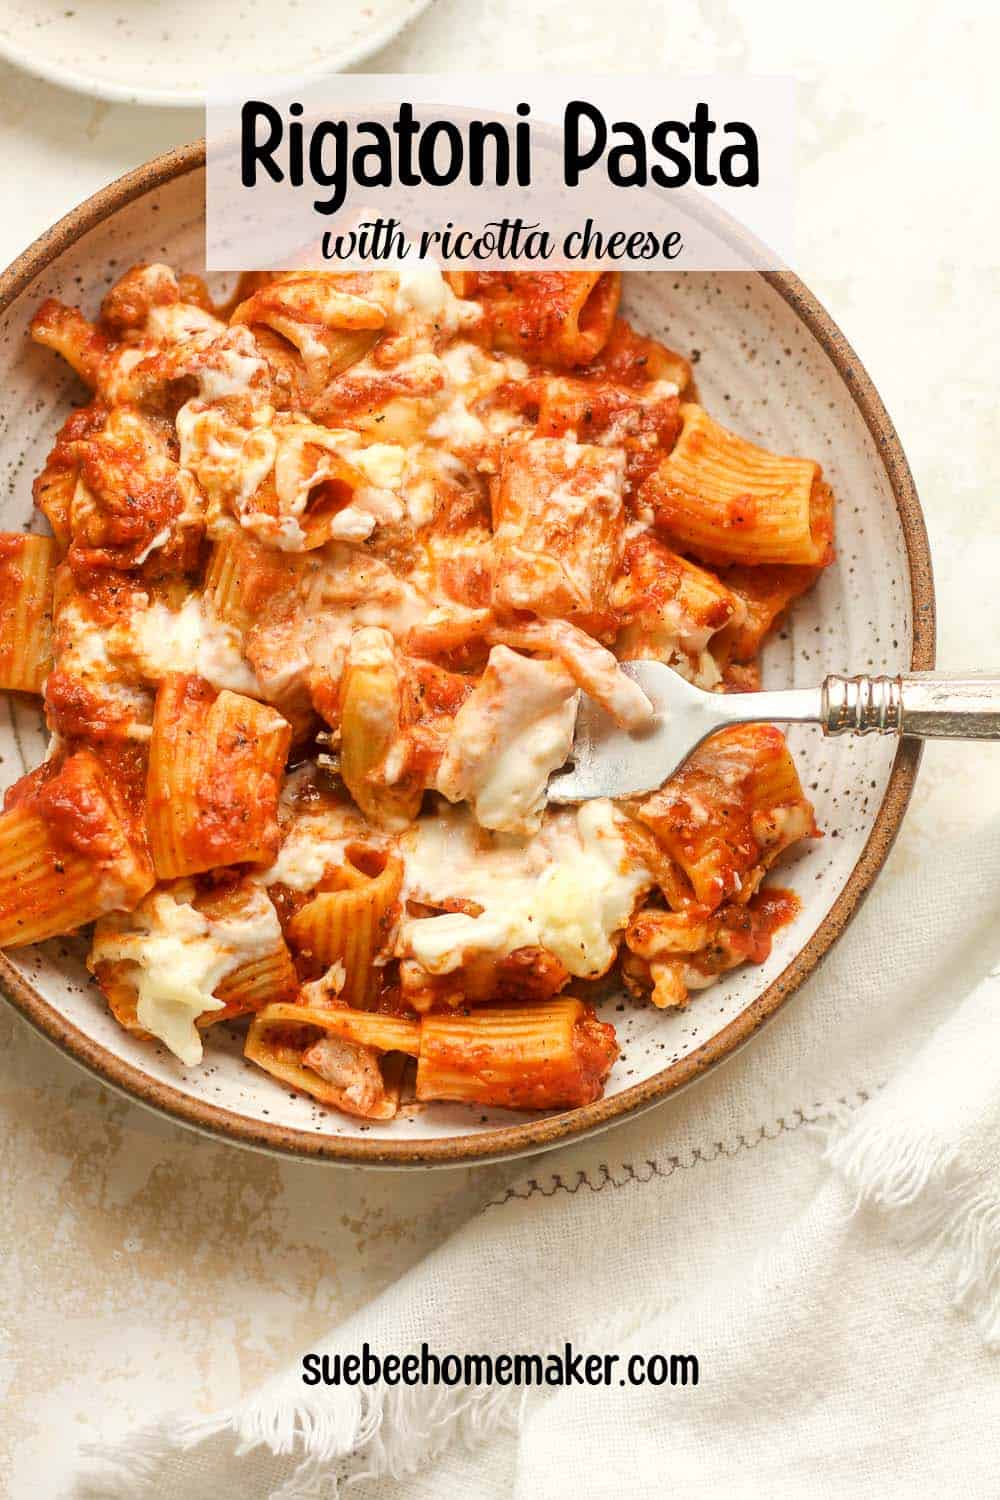 A serving of rigatoni pasta with ricotta cheese.